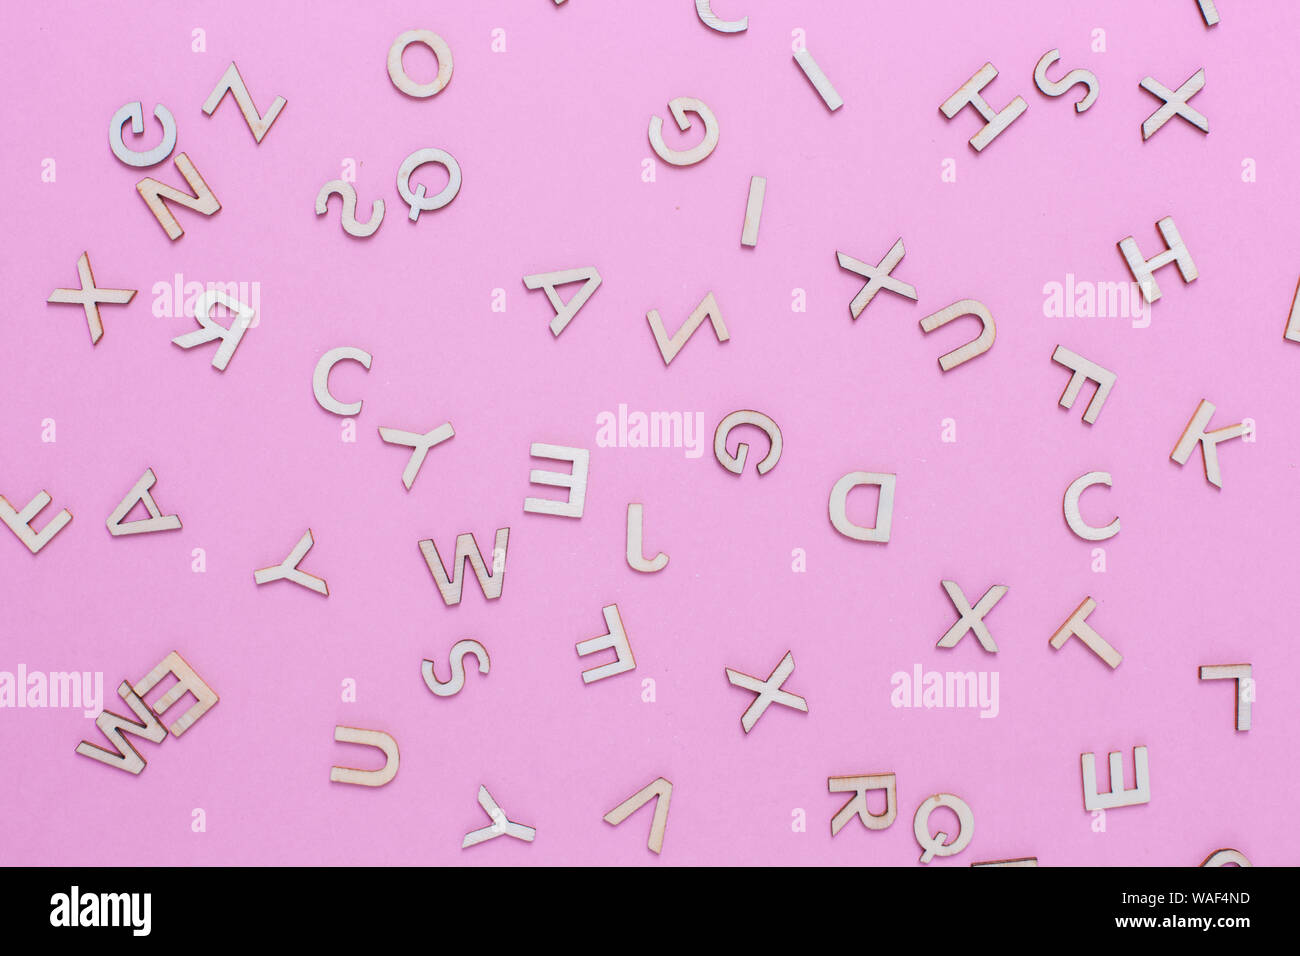 Wooden ABC alphabet letters on pink background Stock Photo